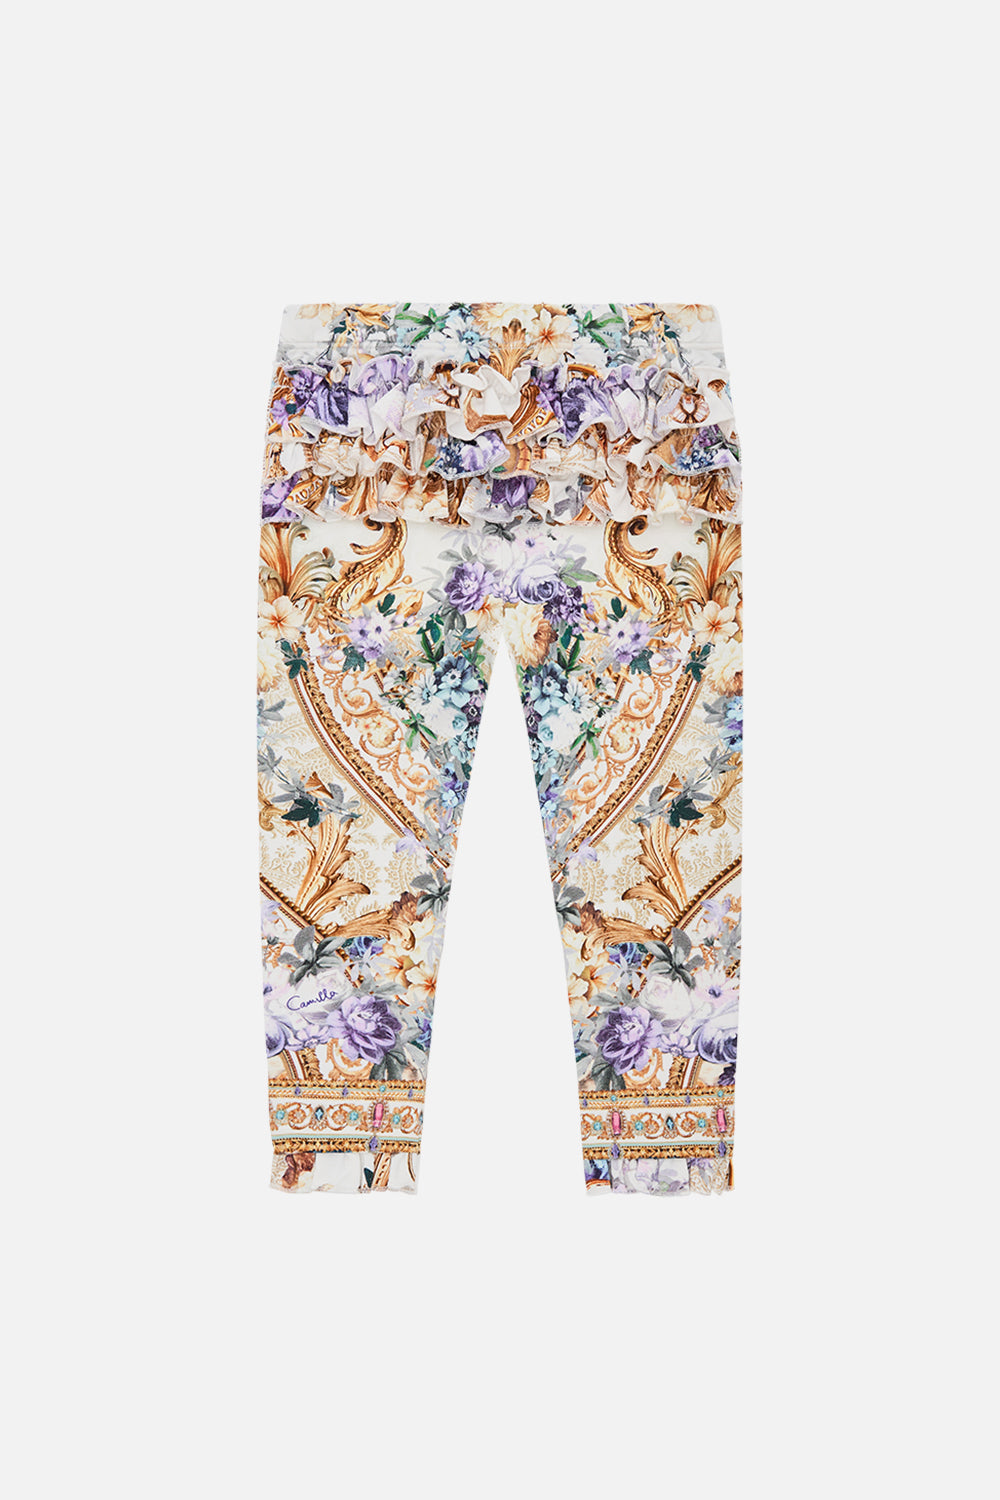 Product view of Milla By CAMILLA babies leggings in Palazzo Play Date print